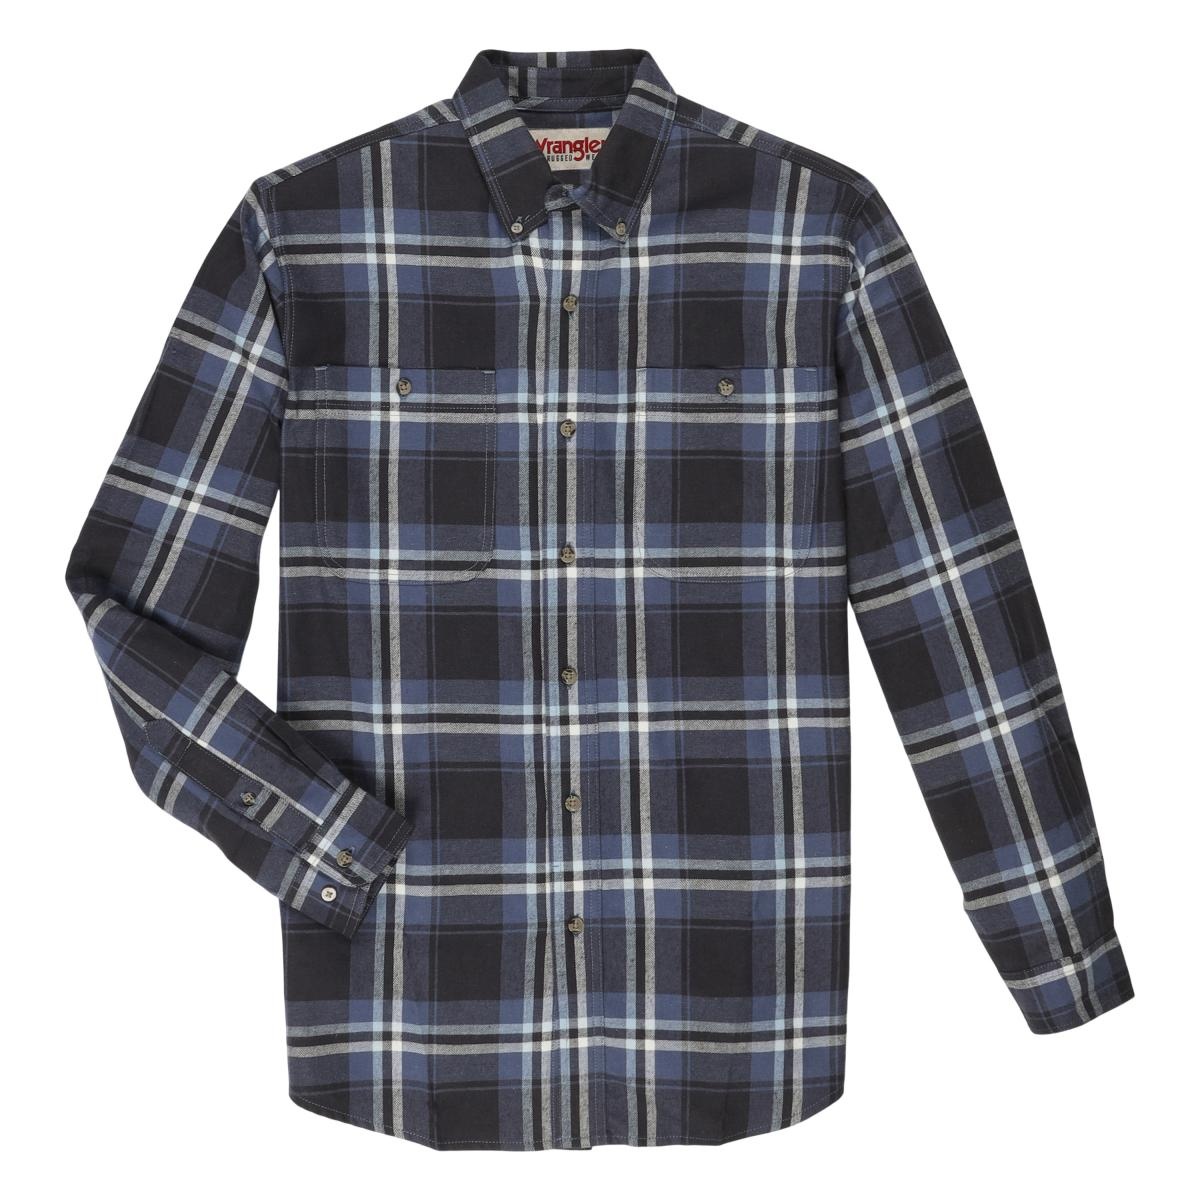 Wrangler Men's Long-Sleeve Flannel Plaid Button-Down Shirt - Traditions ...